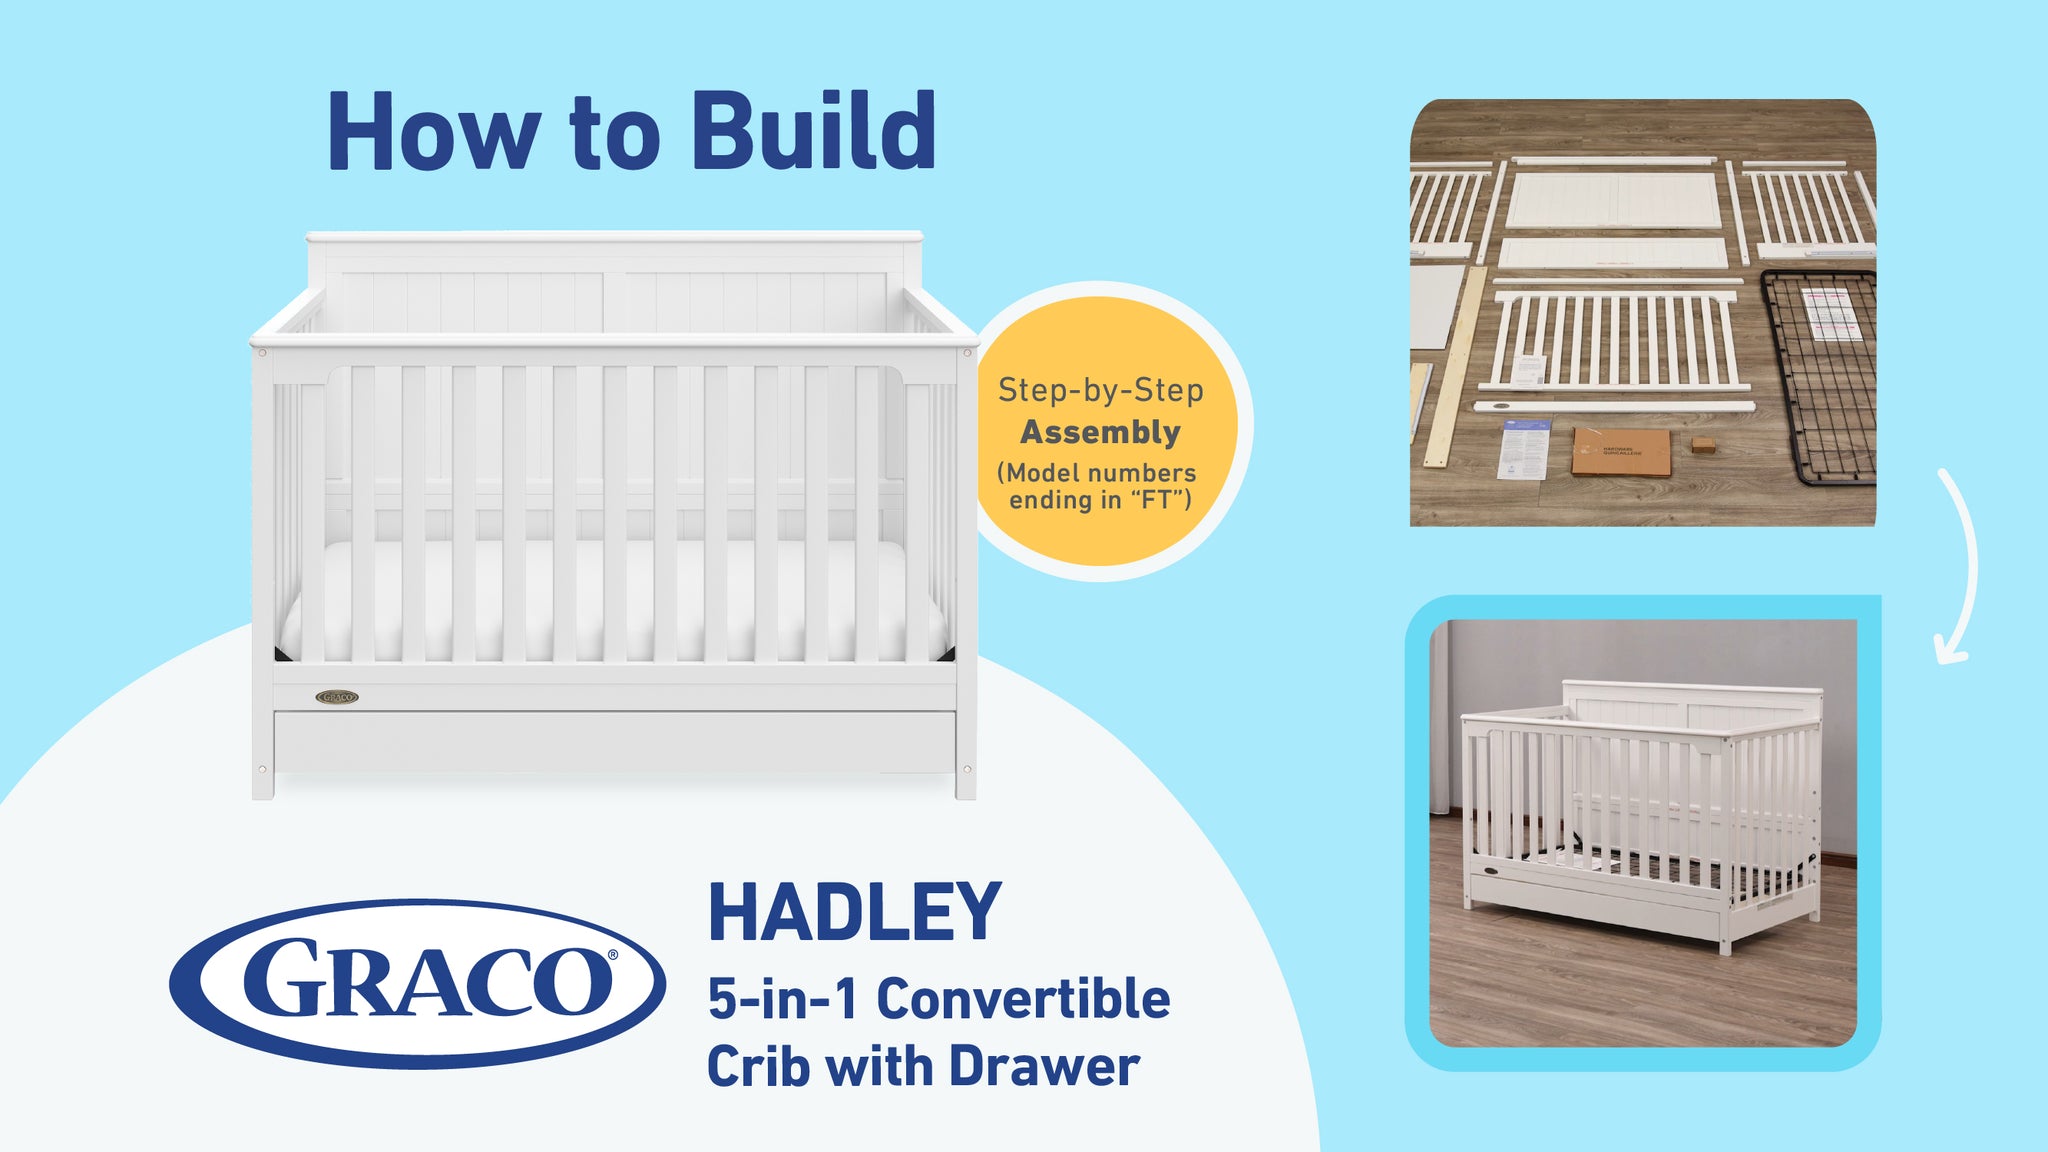 How to Build Graco Hadley 5-in-1 Convertible Crib with Drawer. Step-by-Step Assembly (Model numbers ending in "-FT")